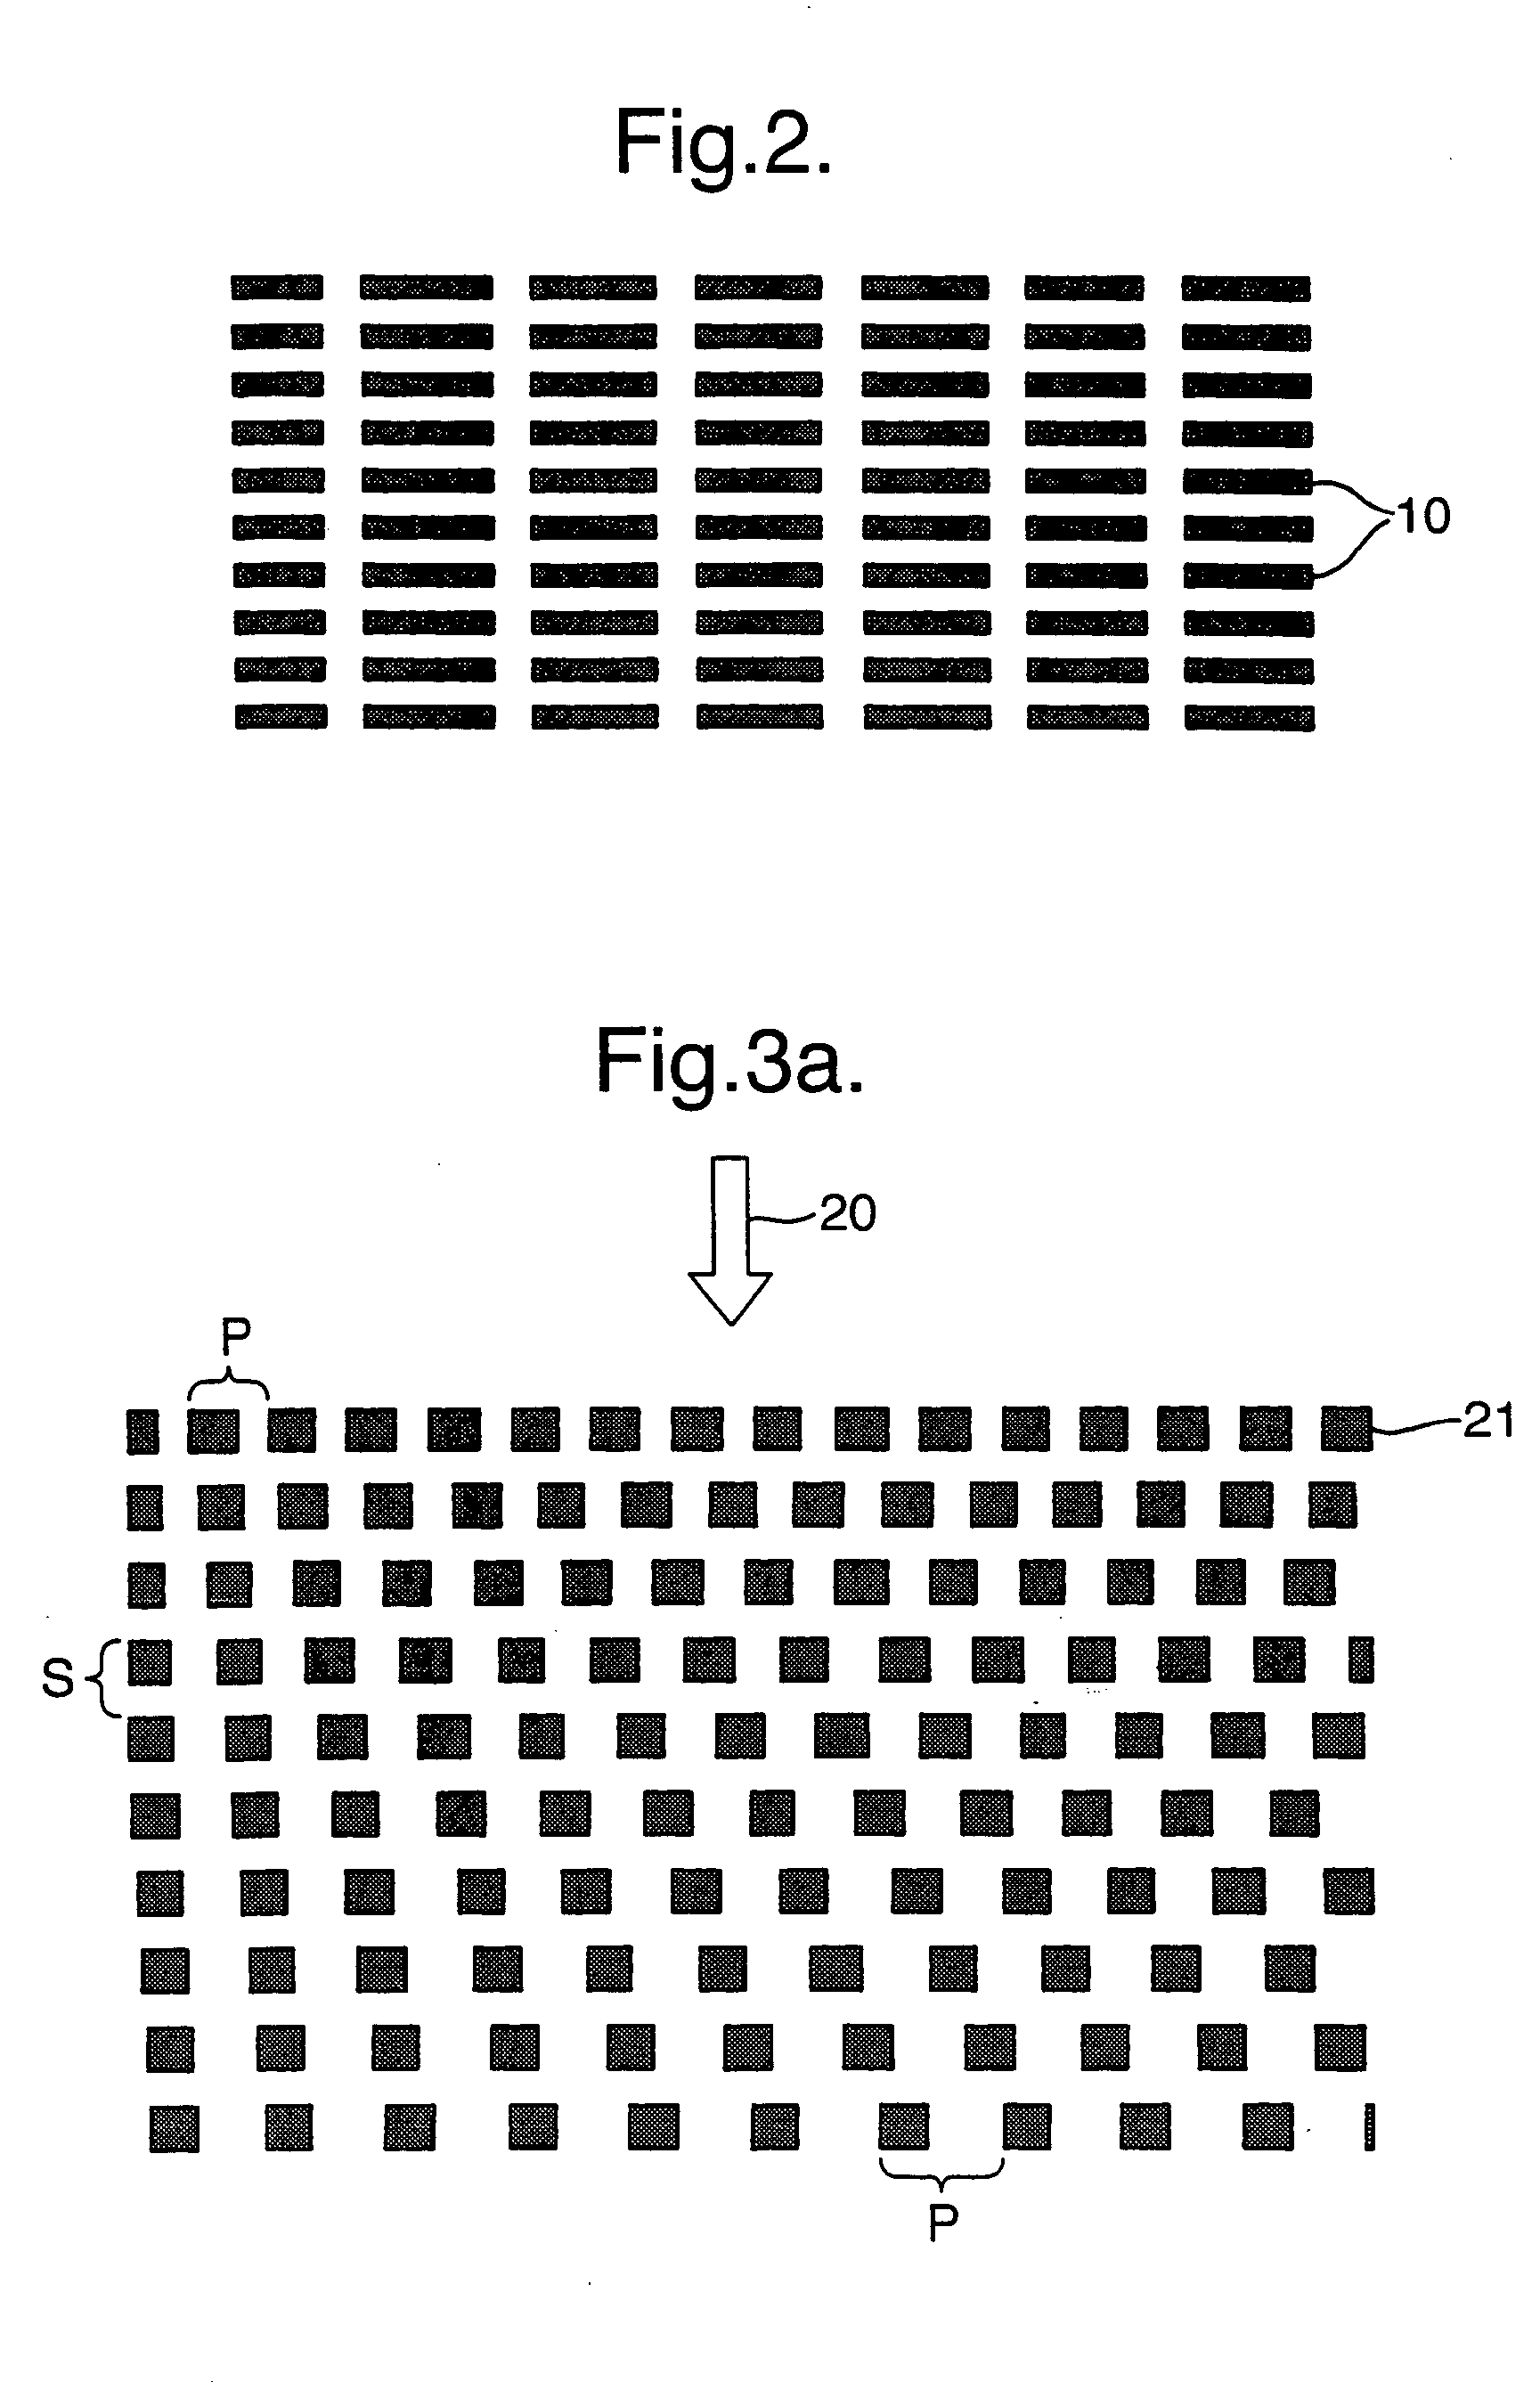 Photonic band structure devices